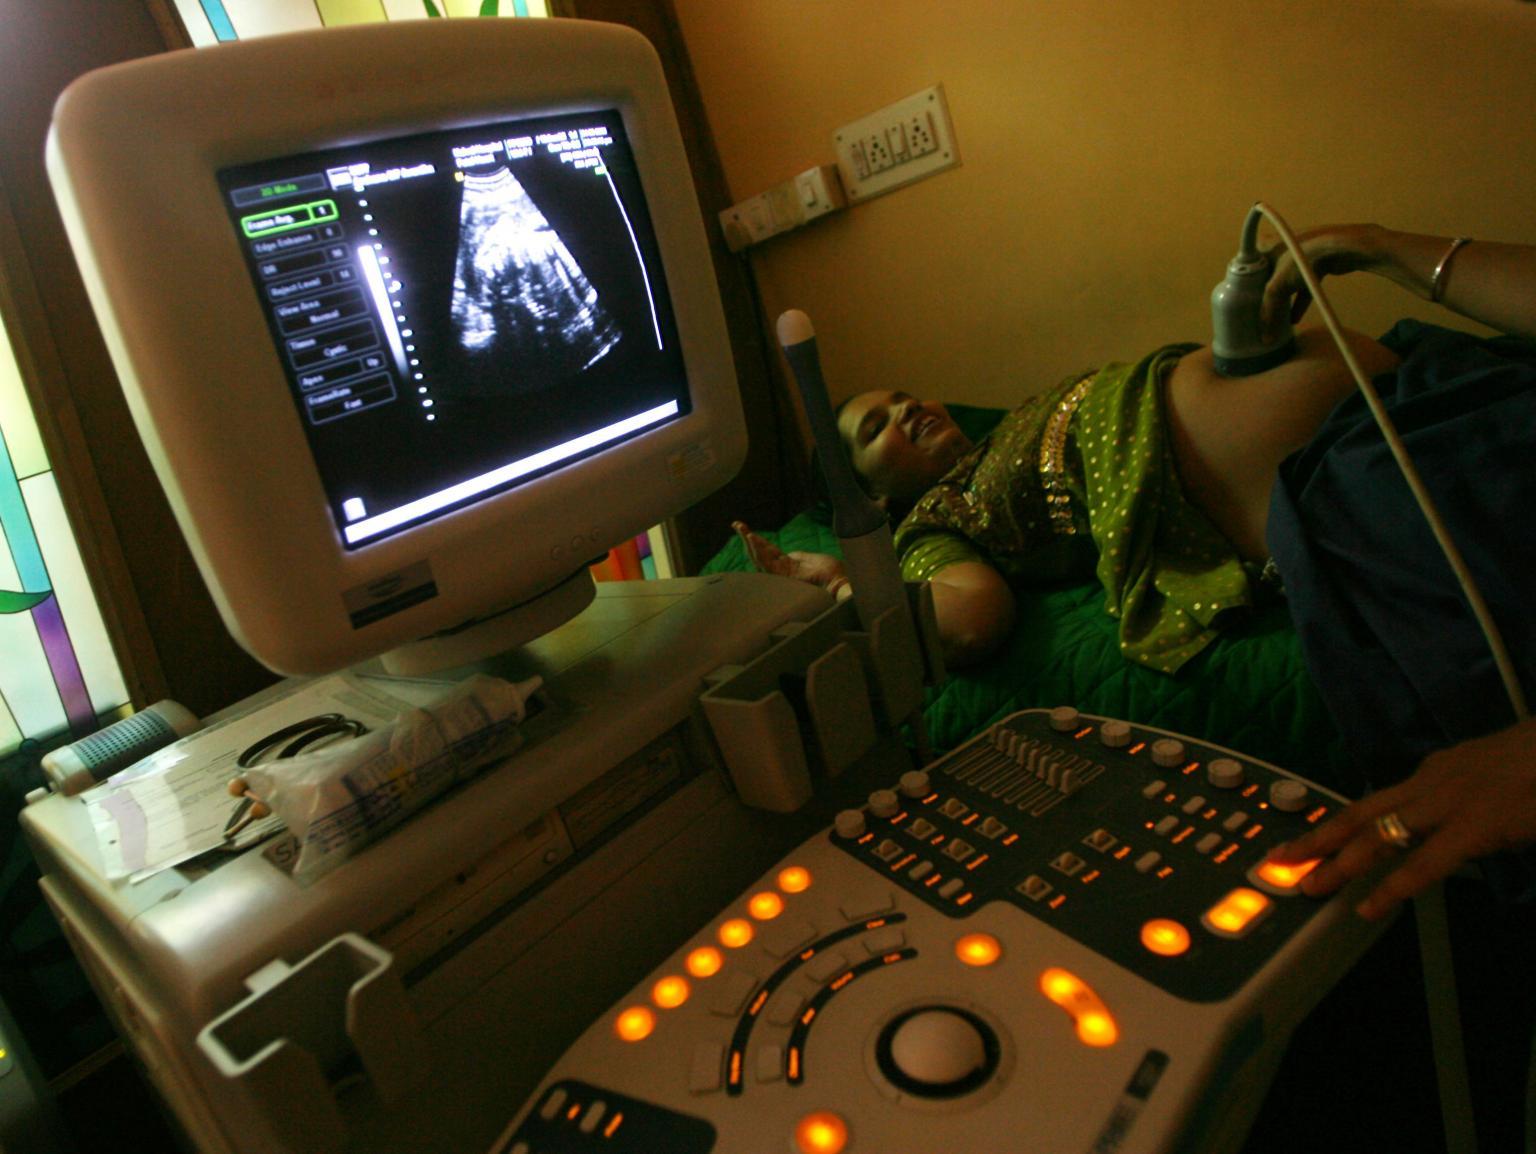 Shabnam, a surrogate mother, has an ultrasound at Patel's clinic in Anand, in the western Indian state of Gujarat on March 4, 2009.